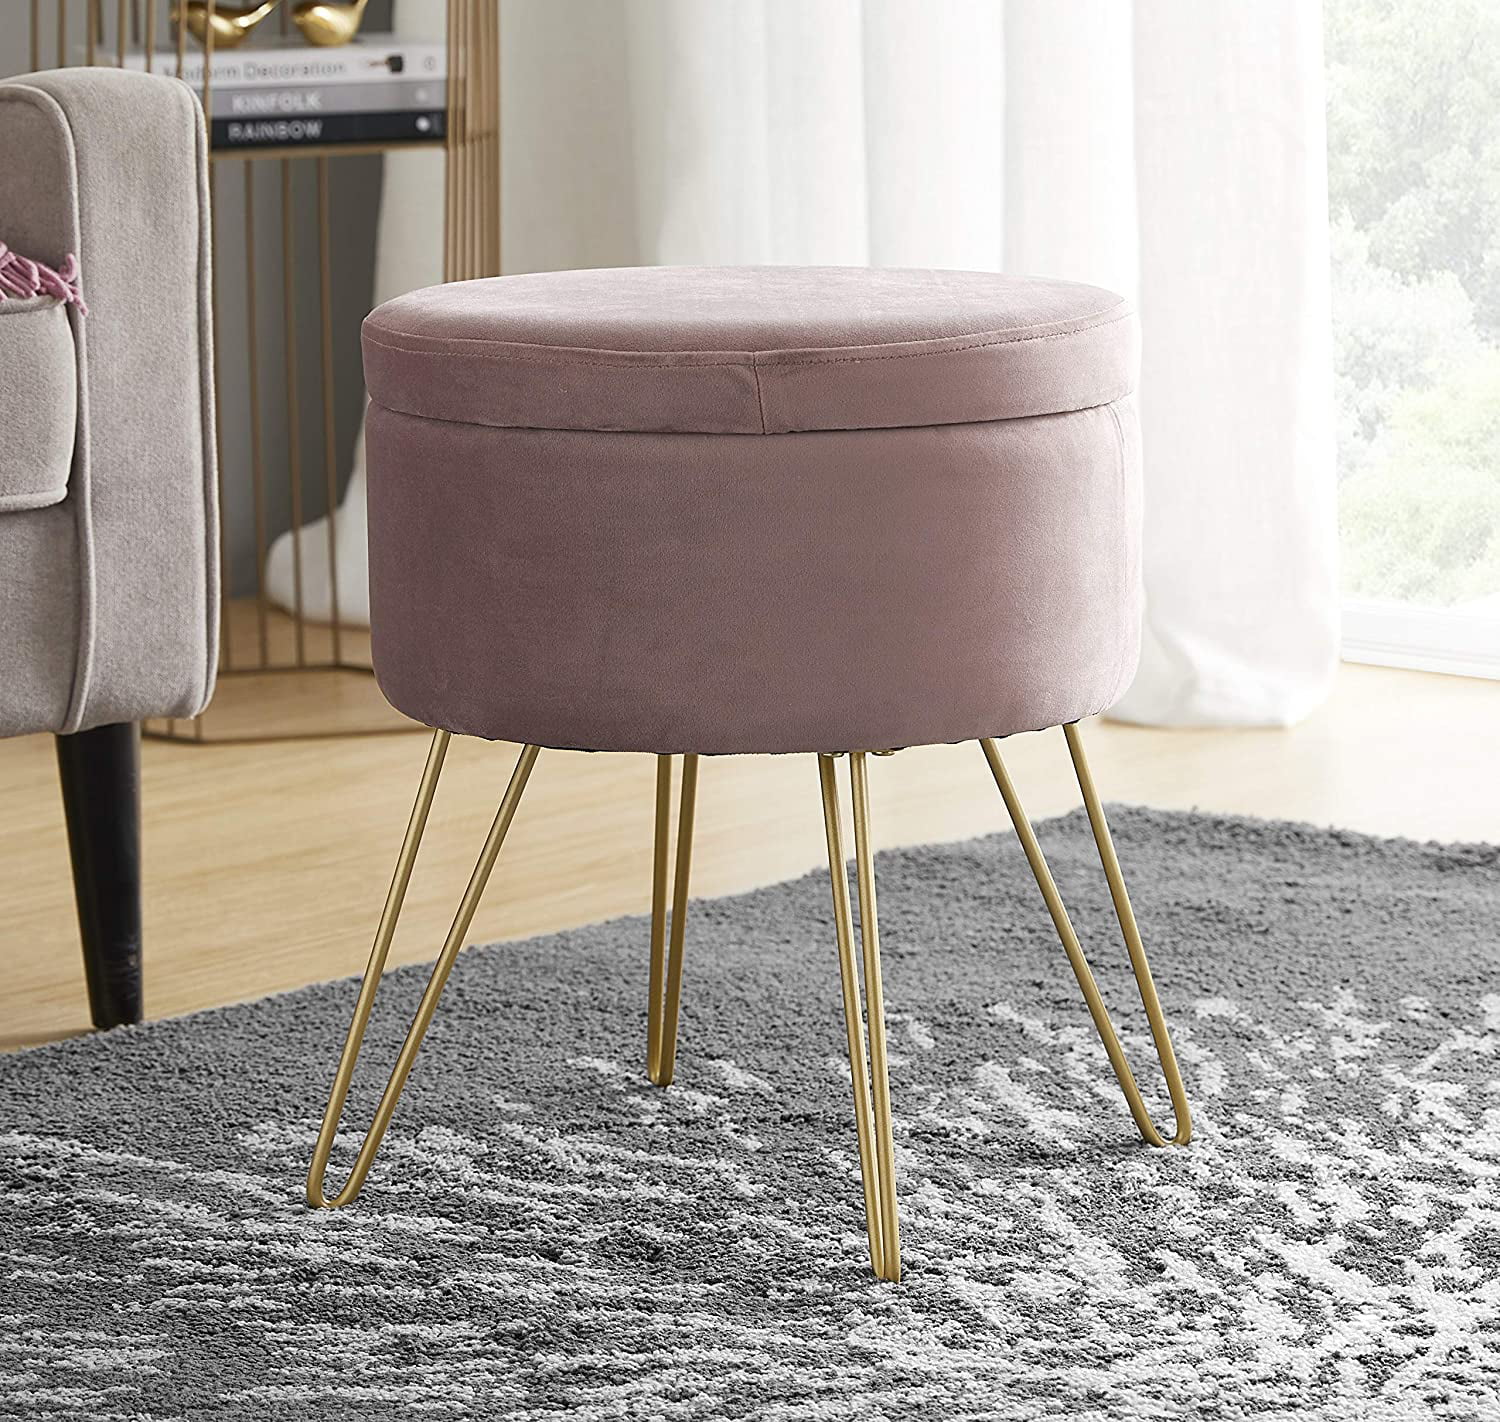 Ottomans Footstool Small Stool Shoe Stool Round Stool Low Stool Children's Poufs Sofa Stool Coffee Table Footstool Floor Chair Makeup Stool Lounge Chair